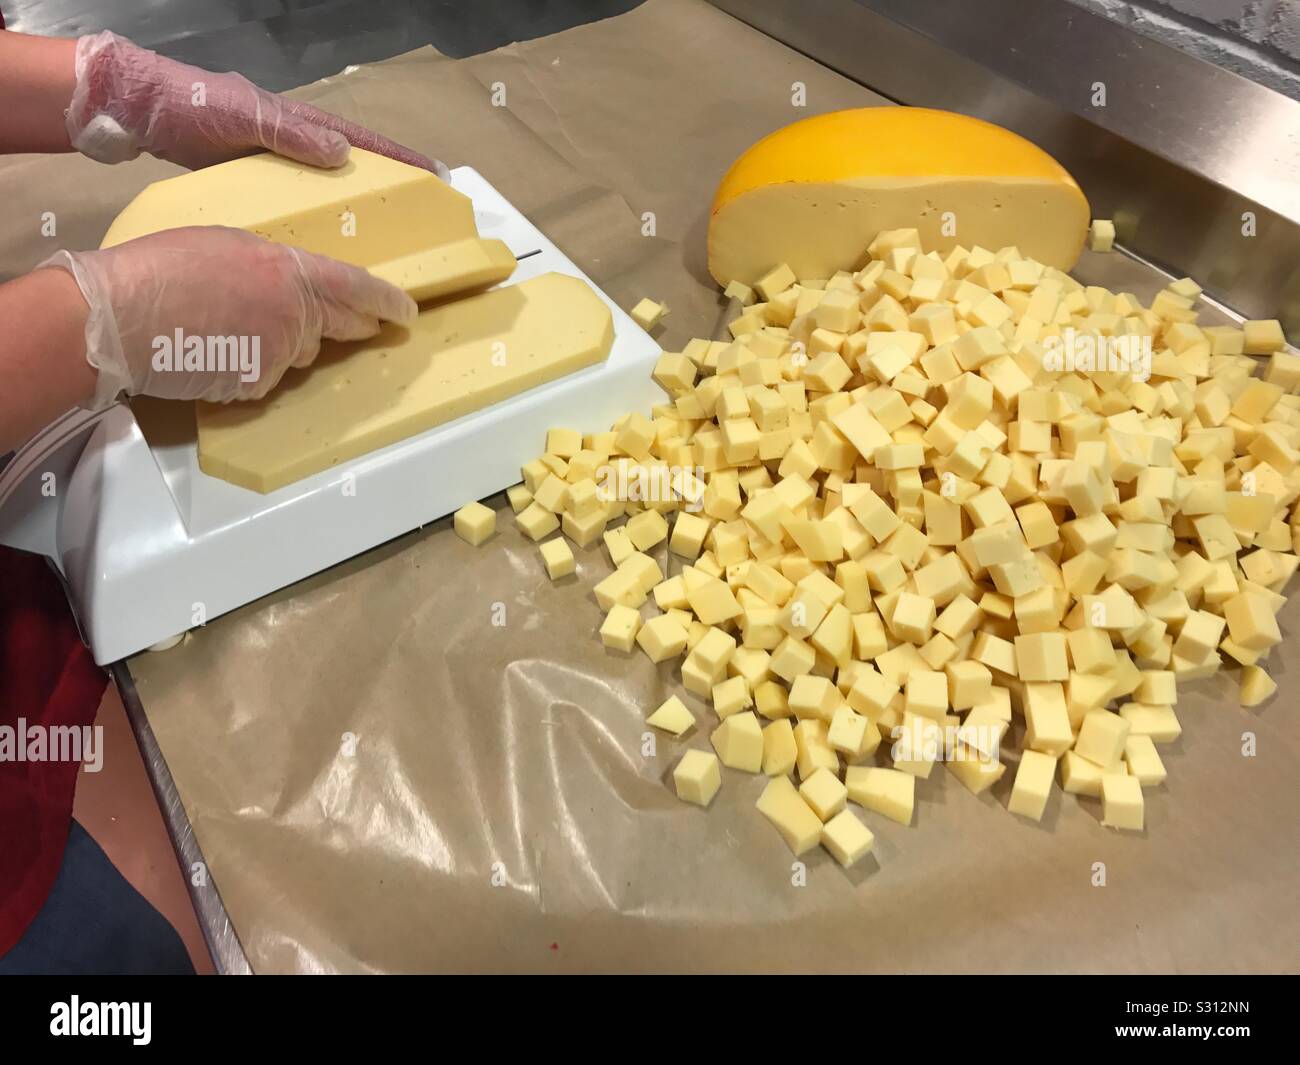 A woman cuts red gouda cheese into cubes. Stock Photo